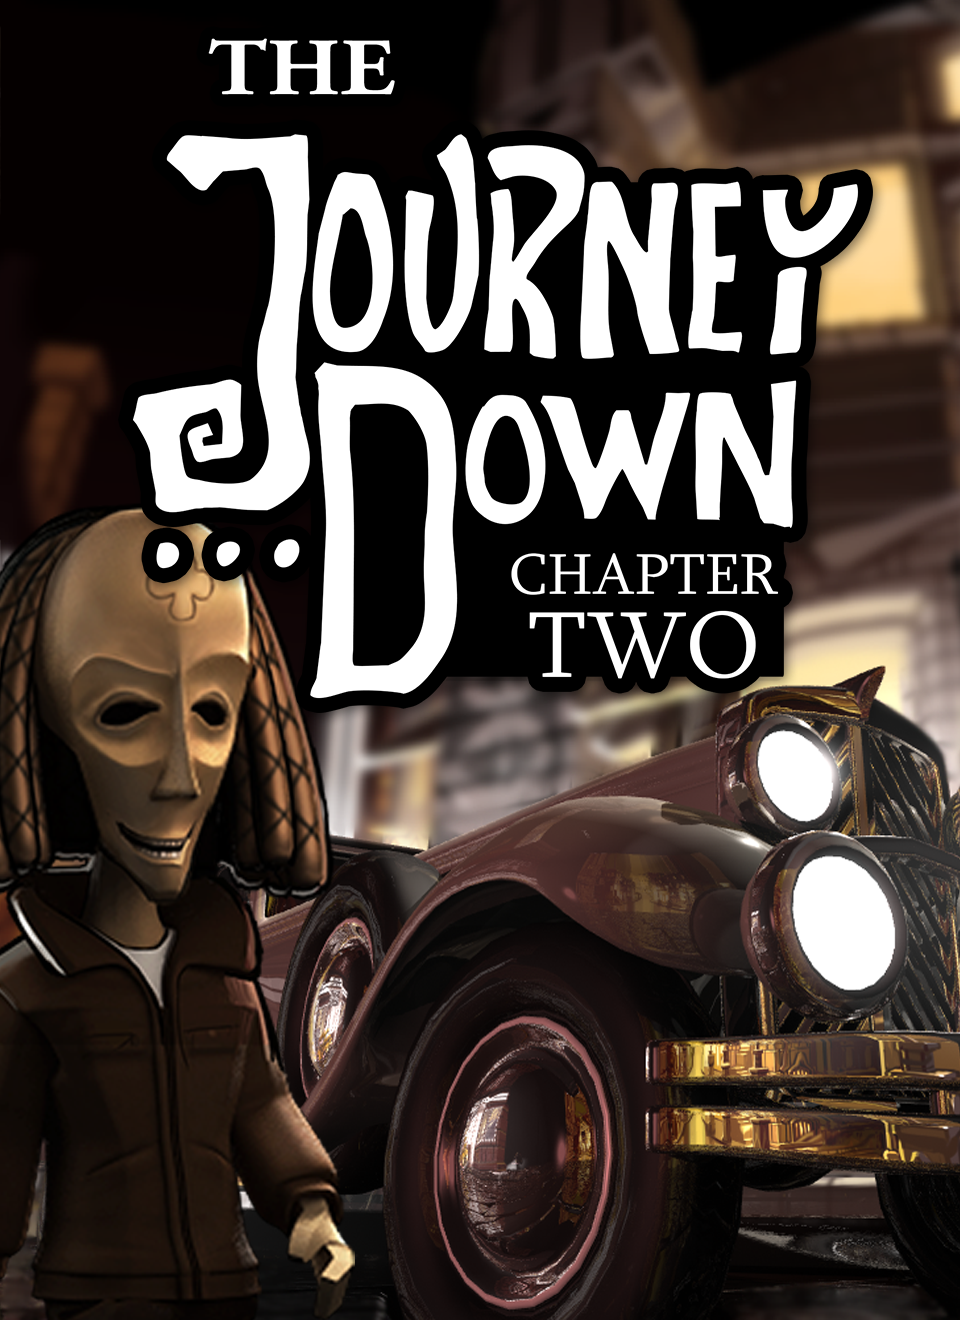 Chapter two 2. The Journey down. The Journey down Chapter one. Папе плей Chapter 2 картинки.